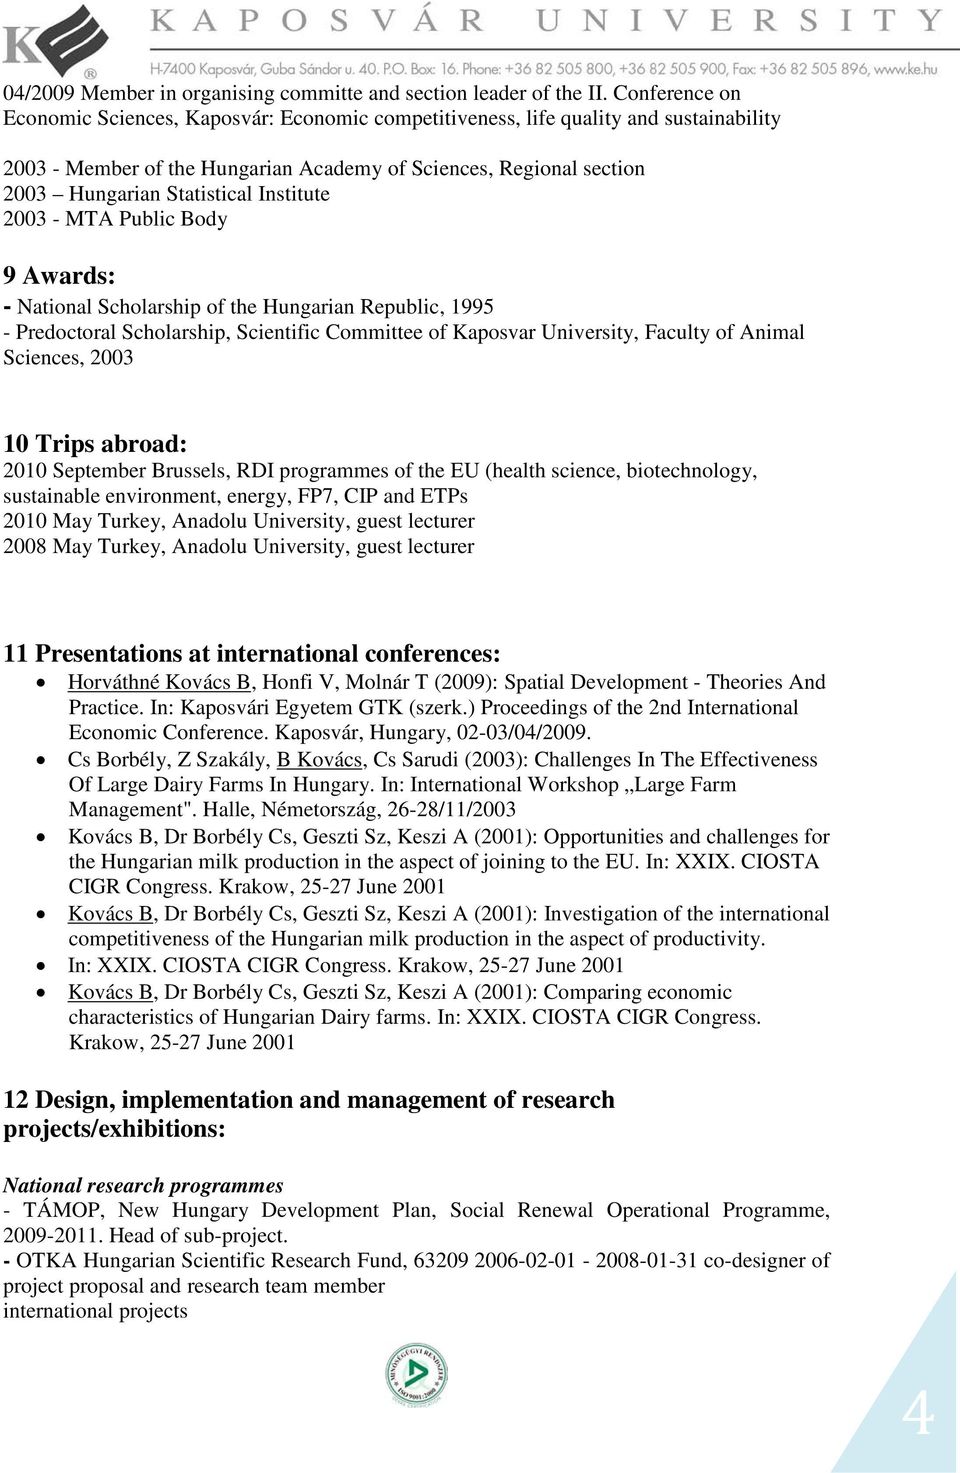 Institute 2003 - MTA Public Body 9 Awards: - National Scholarship of the Hungarian Republic, 1995 - Predoctoral Scholarship, Scientific Committee of Kaposvar University, Faculty of Animal Sciences,